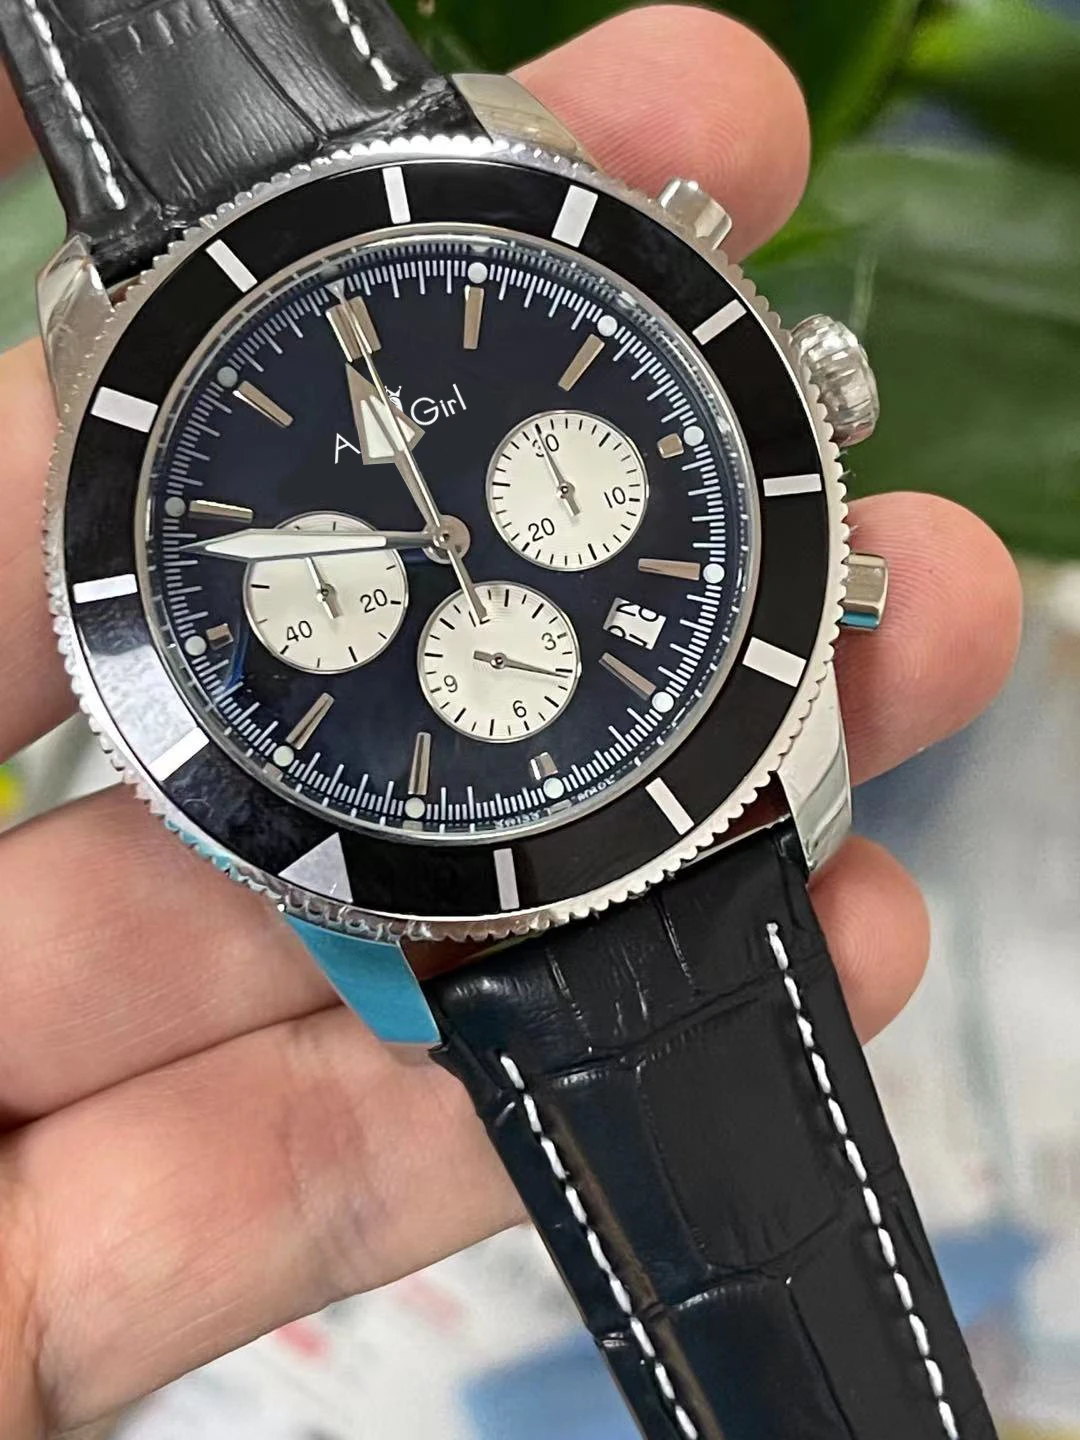 

Luxury Black Blue Leather Quartz Chronograph Watch Ceramic Bezel Sapphire Glass Mens Stainless Steel Date Watches 46mm AAA+